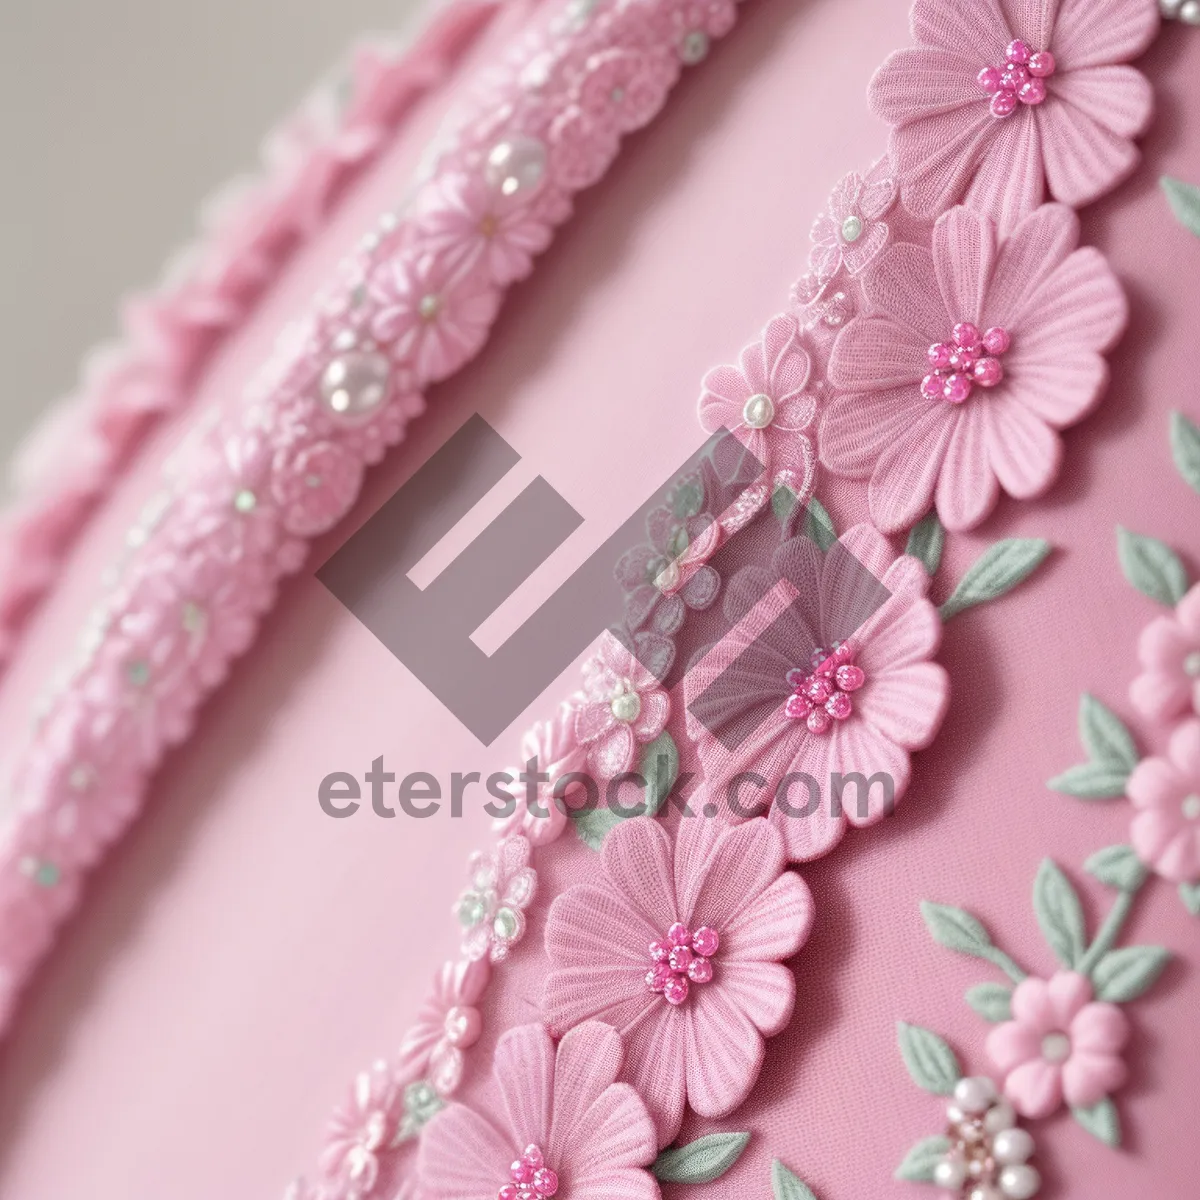 Picture of Pink Floral Blossom Pattern with Petals